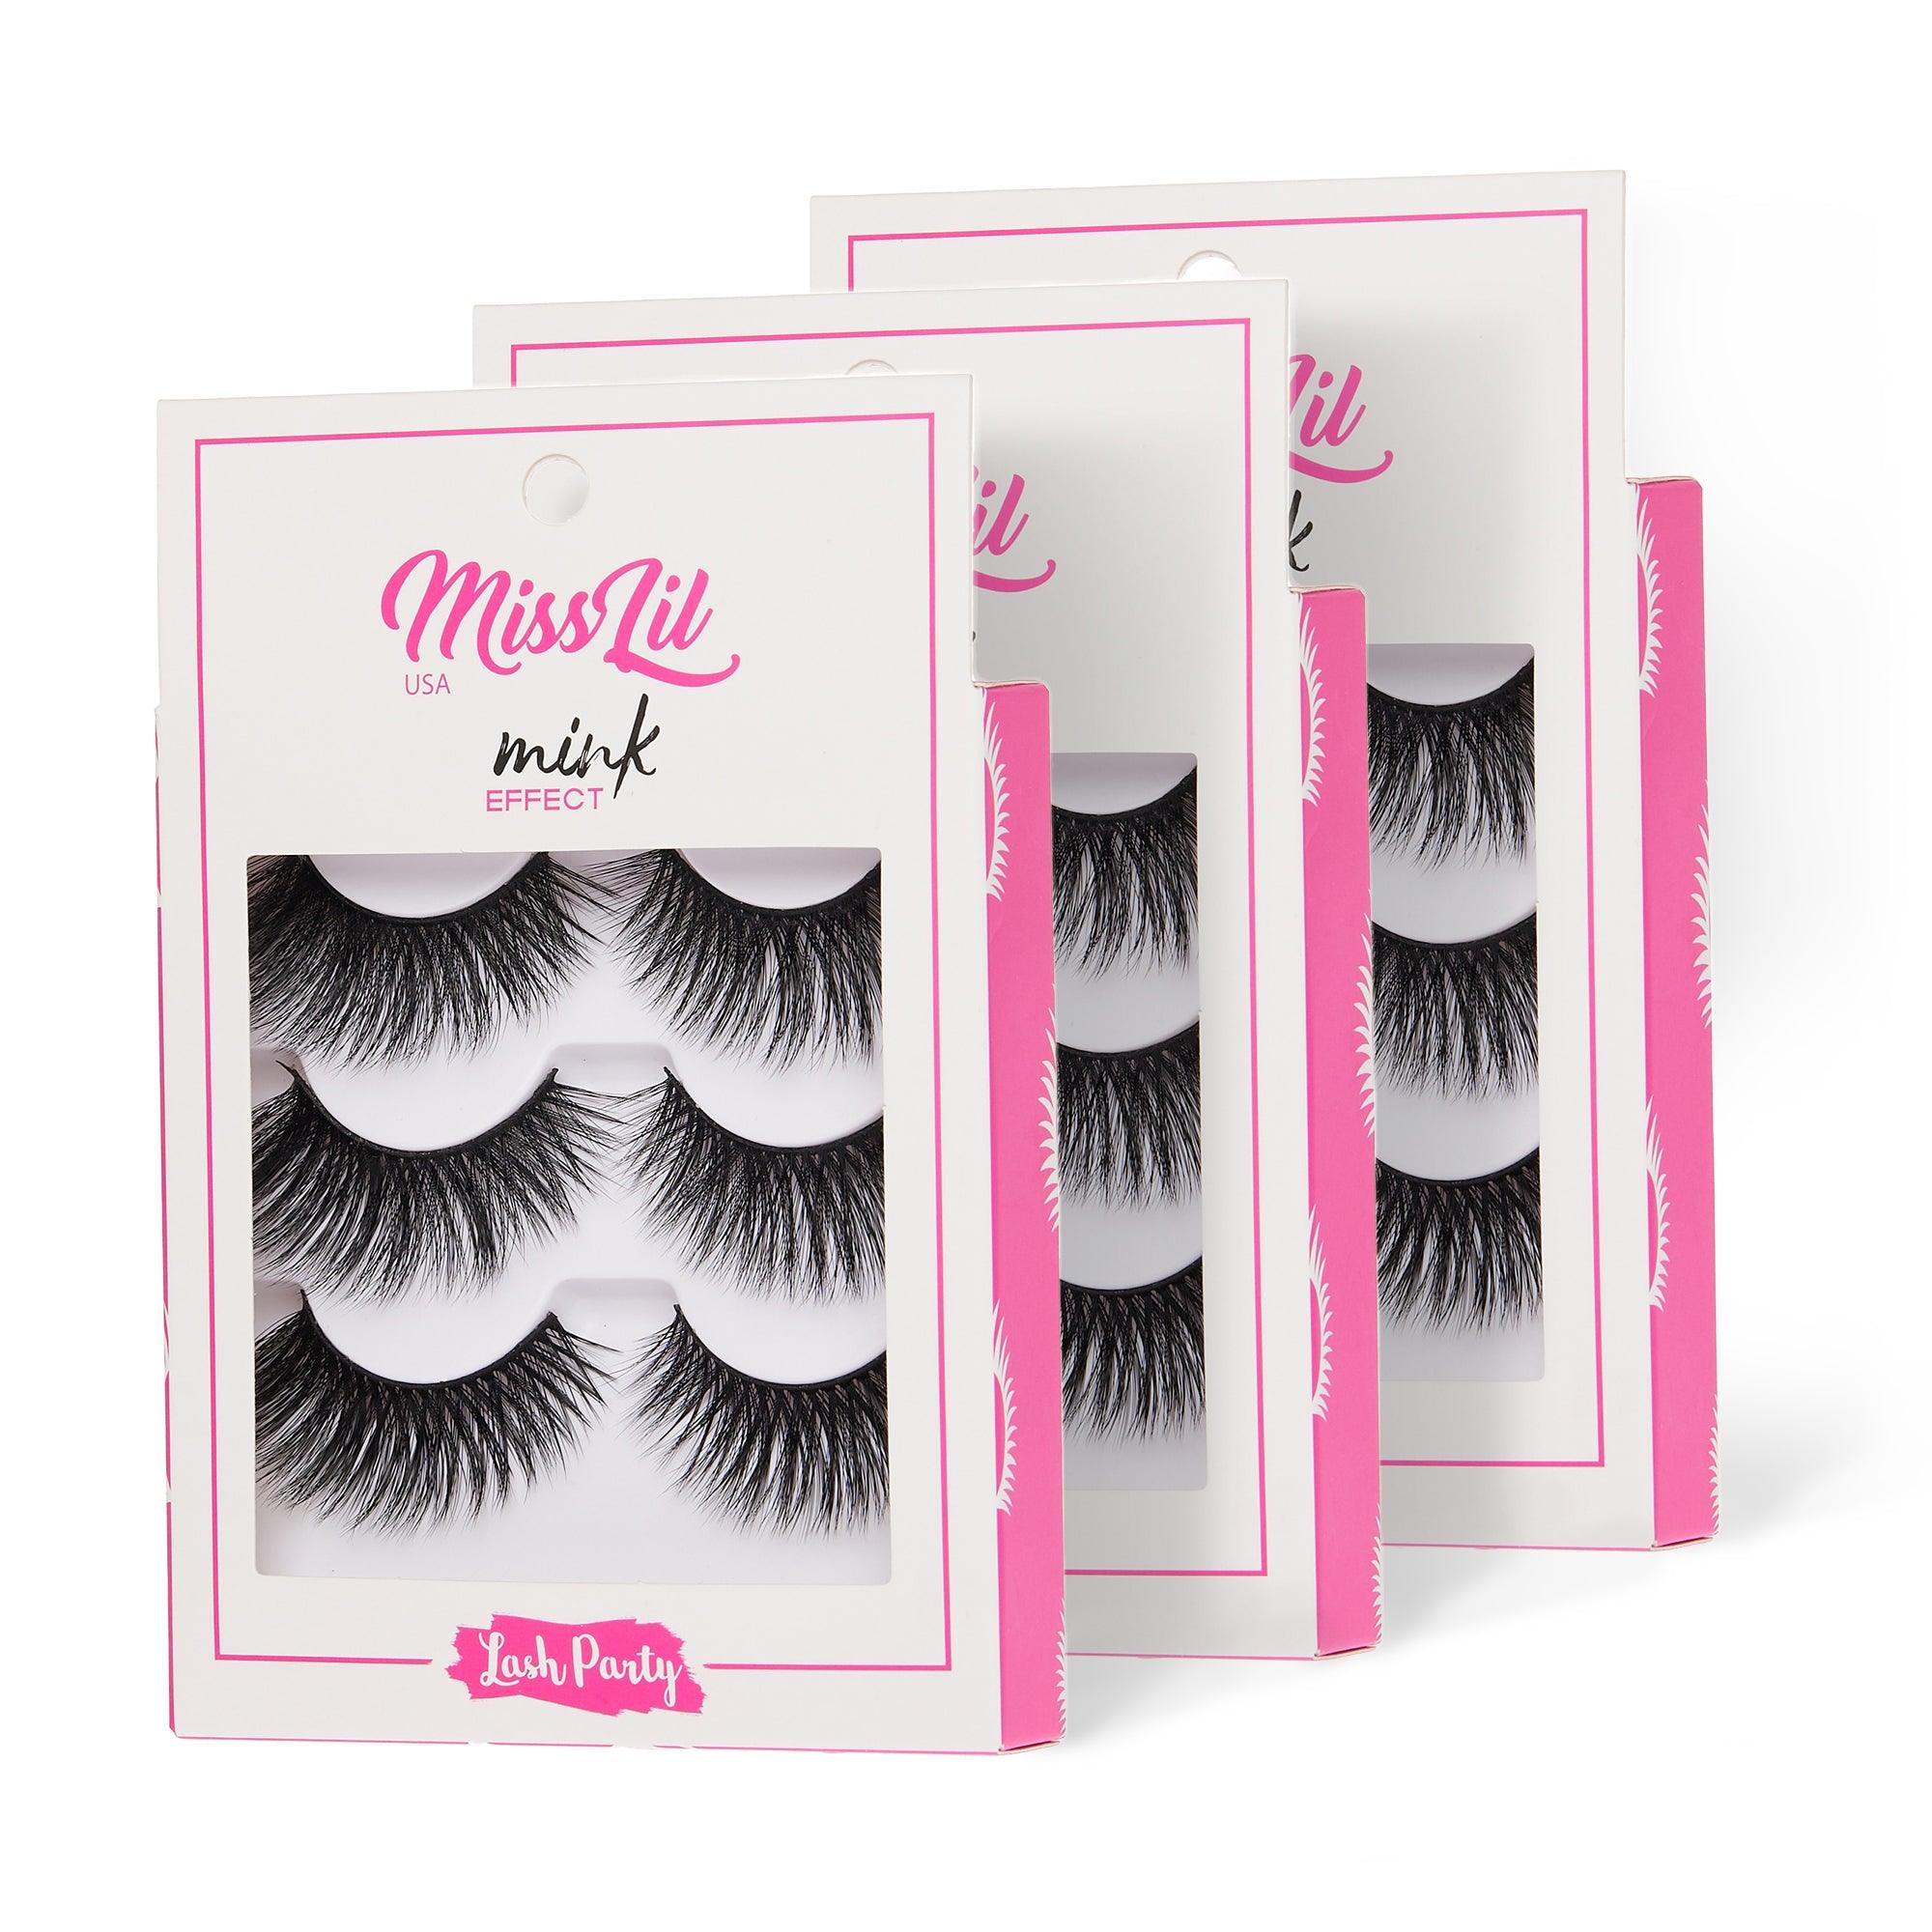 3-Pair Faux Mink Effect Eyelashes - Lash Party Collection #25 - Pack of 3 - Miss Lil USA